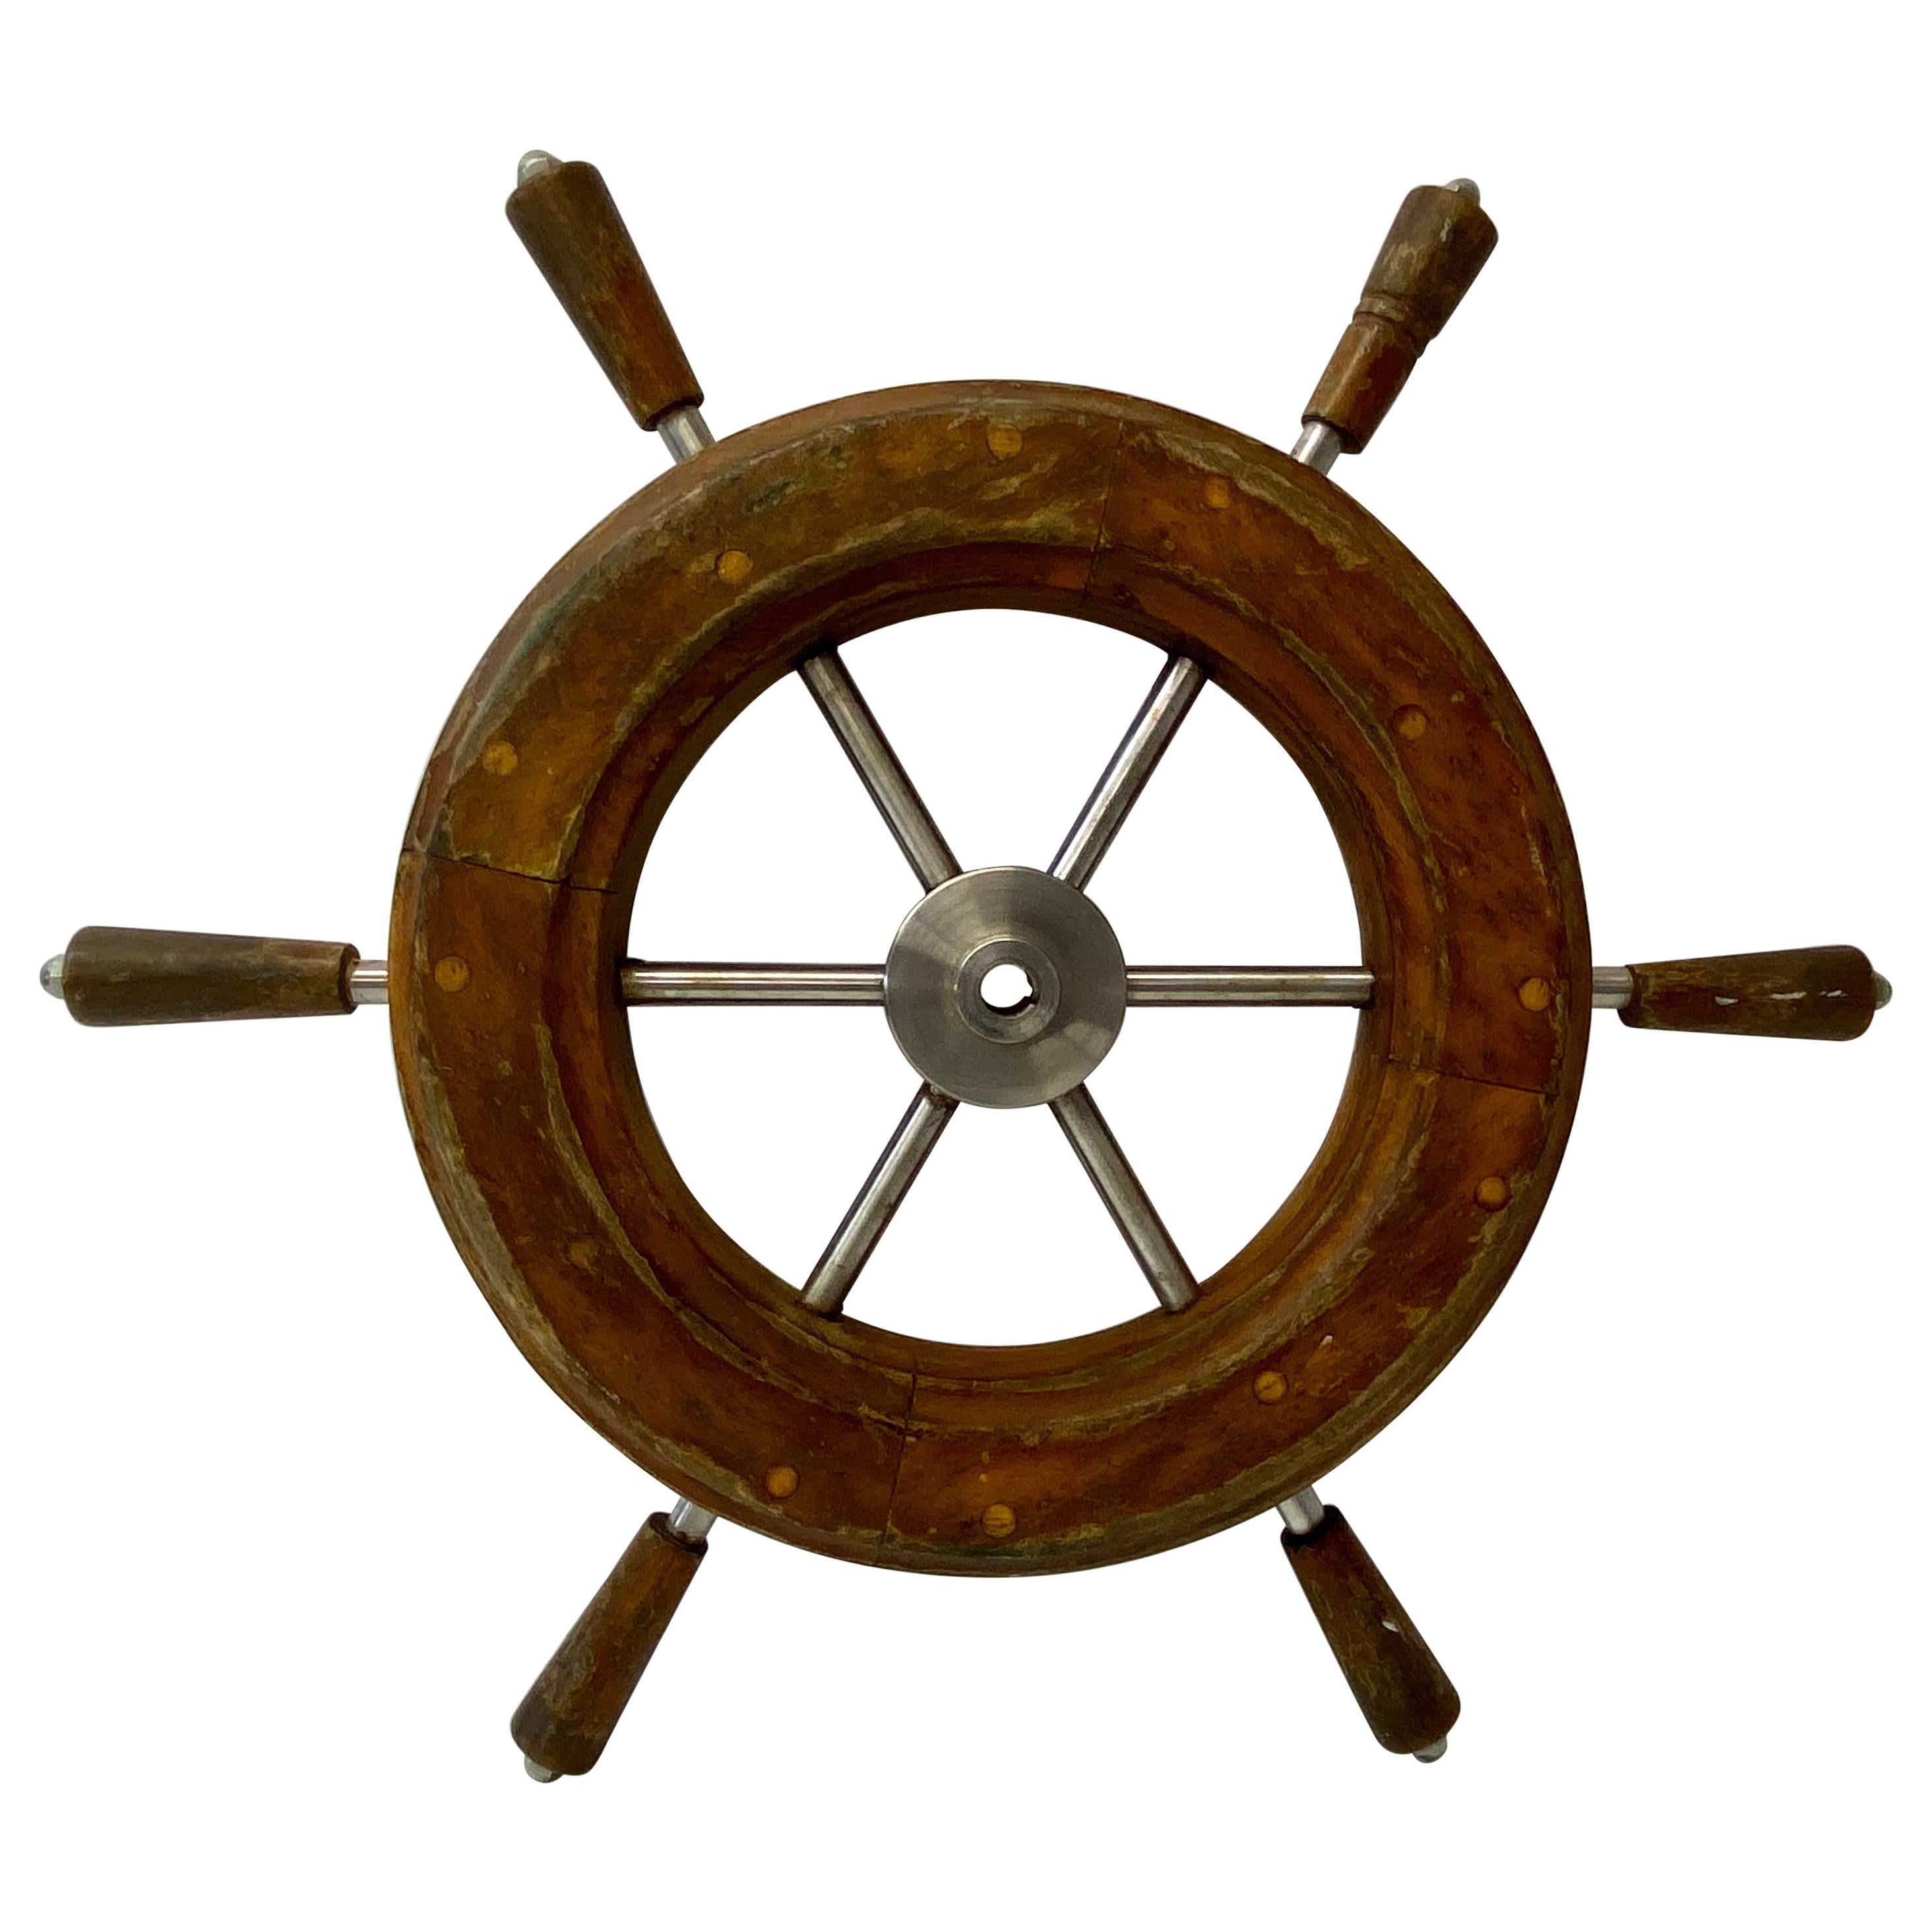 Early to Mid 20th Century Teak and Aluminum Ships Wheel 1930s to 1950s For Sale